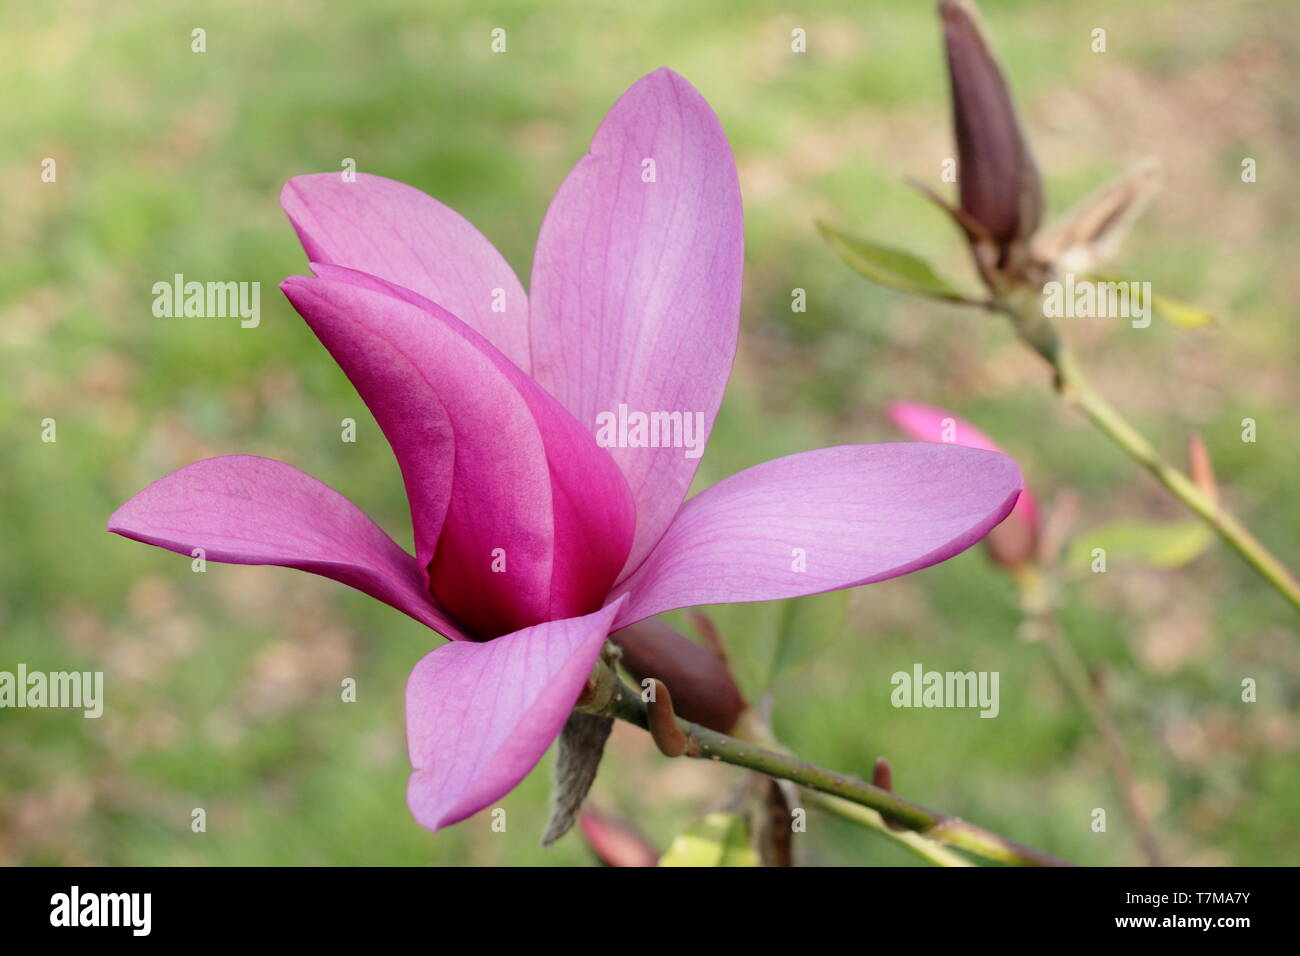 Magnolia 'Heaven Scent'.  Cup shaped blossoms of Magnolia 'Heaven Scent' Stock Photo